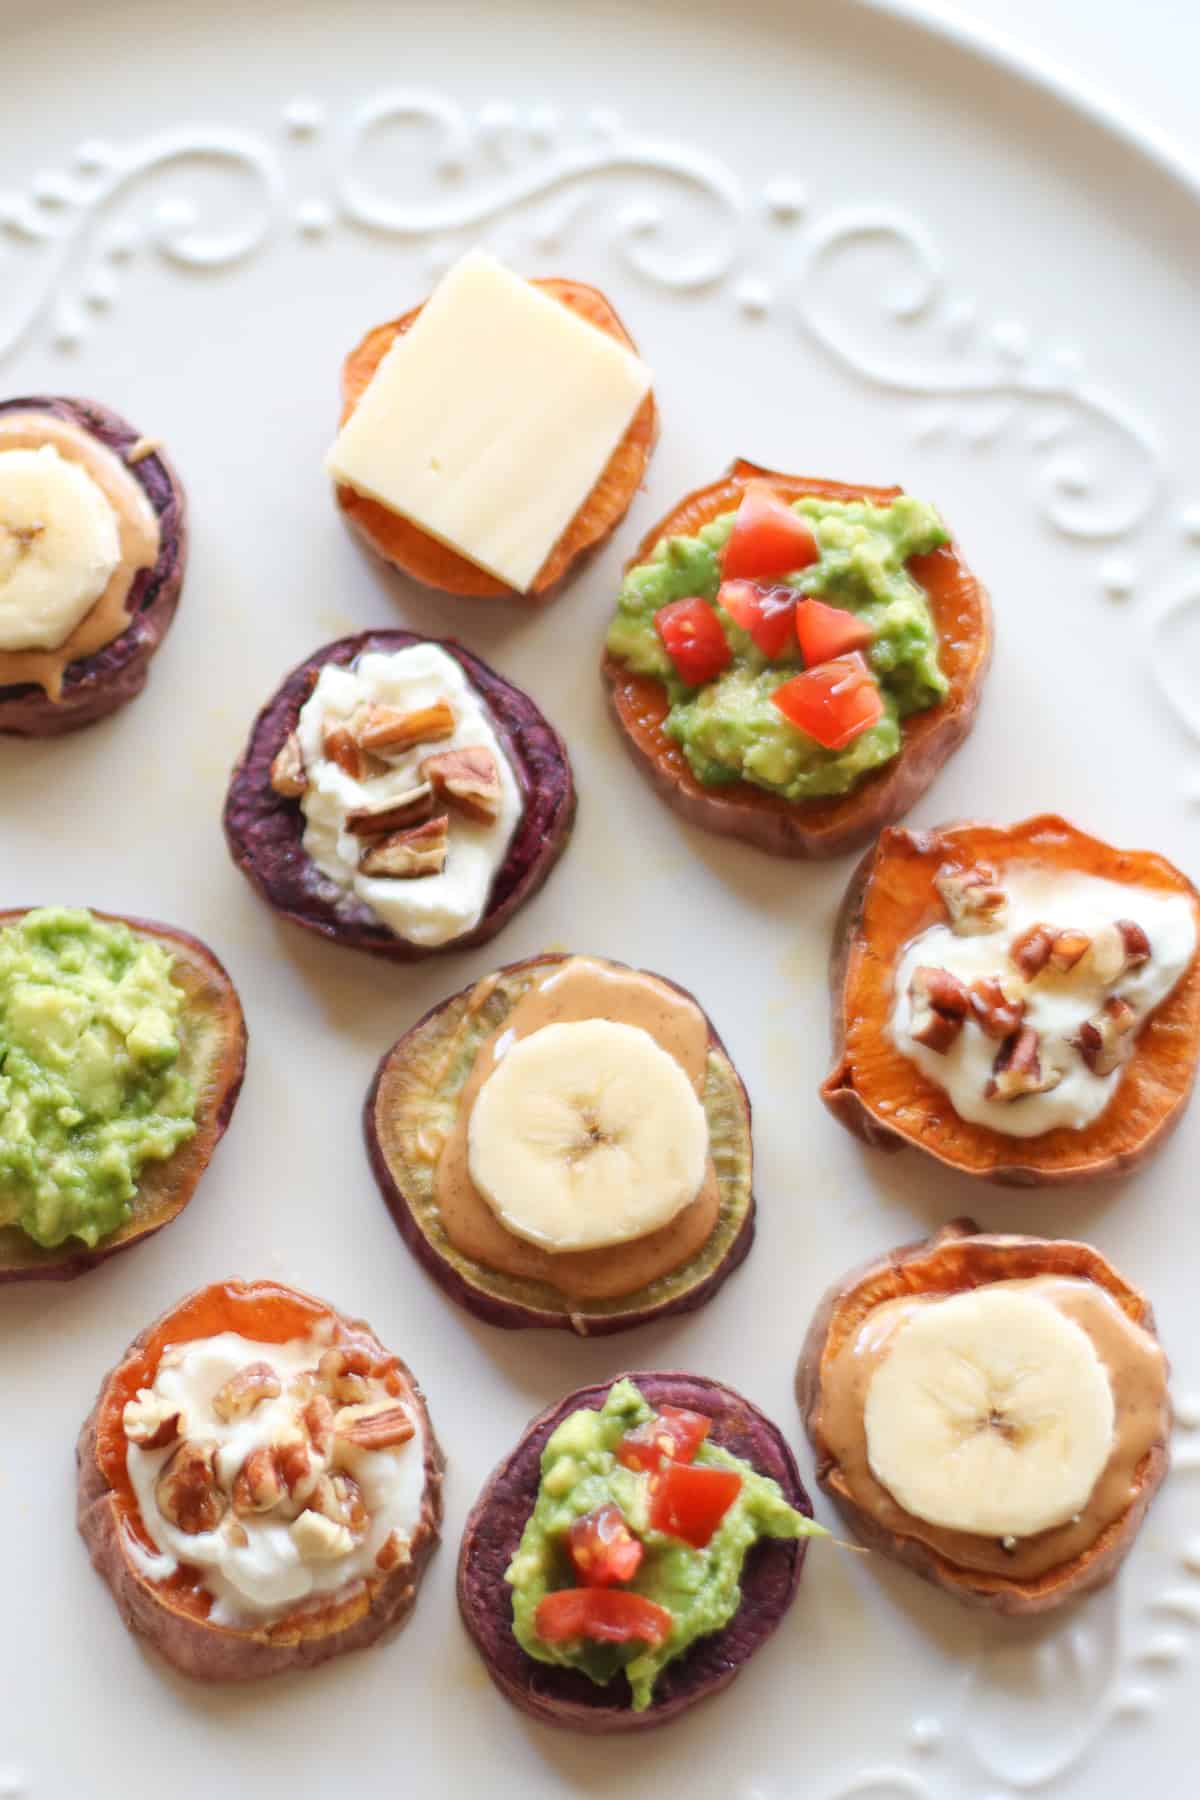 Baked Sweet potato rounds with an assortment of toppings.